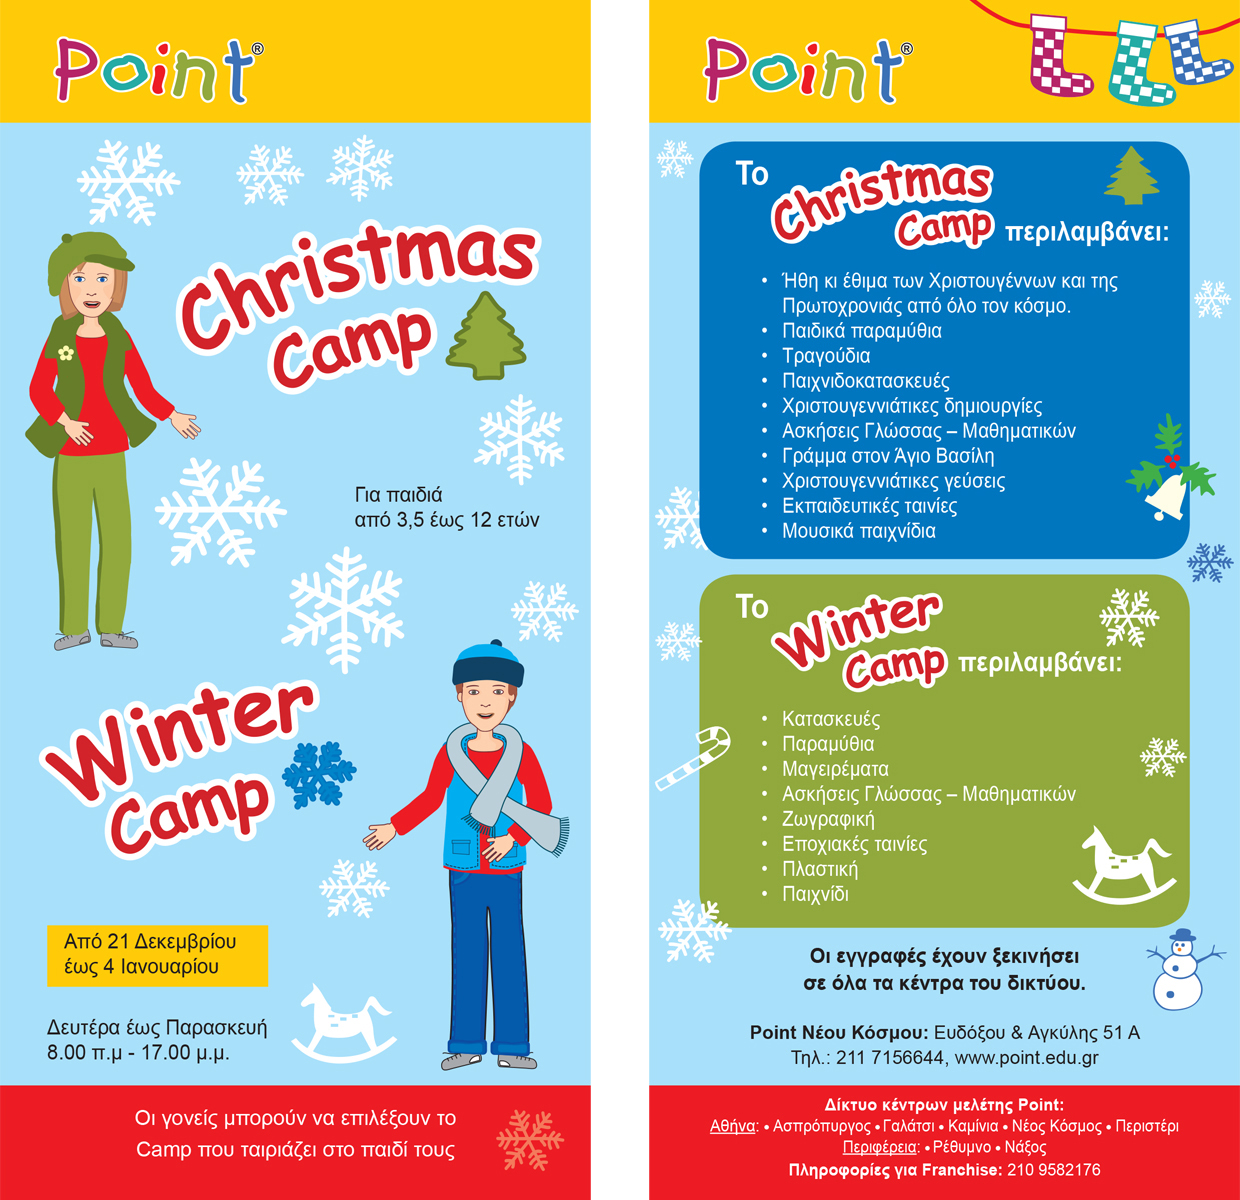 PointCHRISTMAS 1